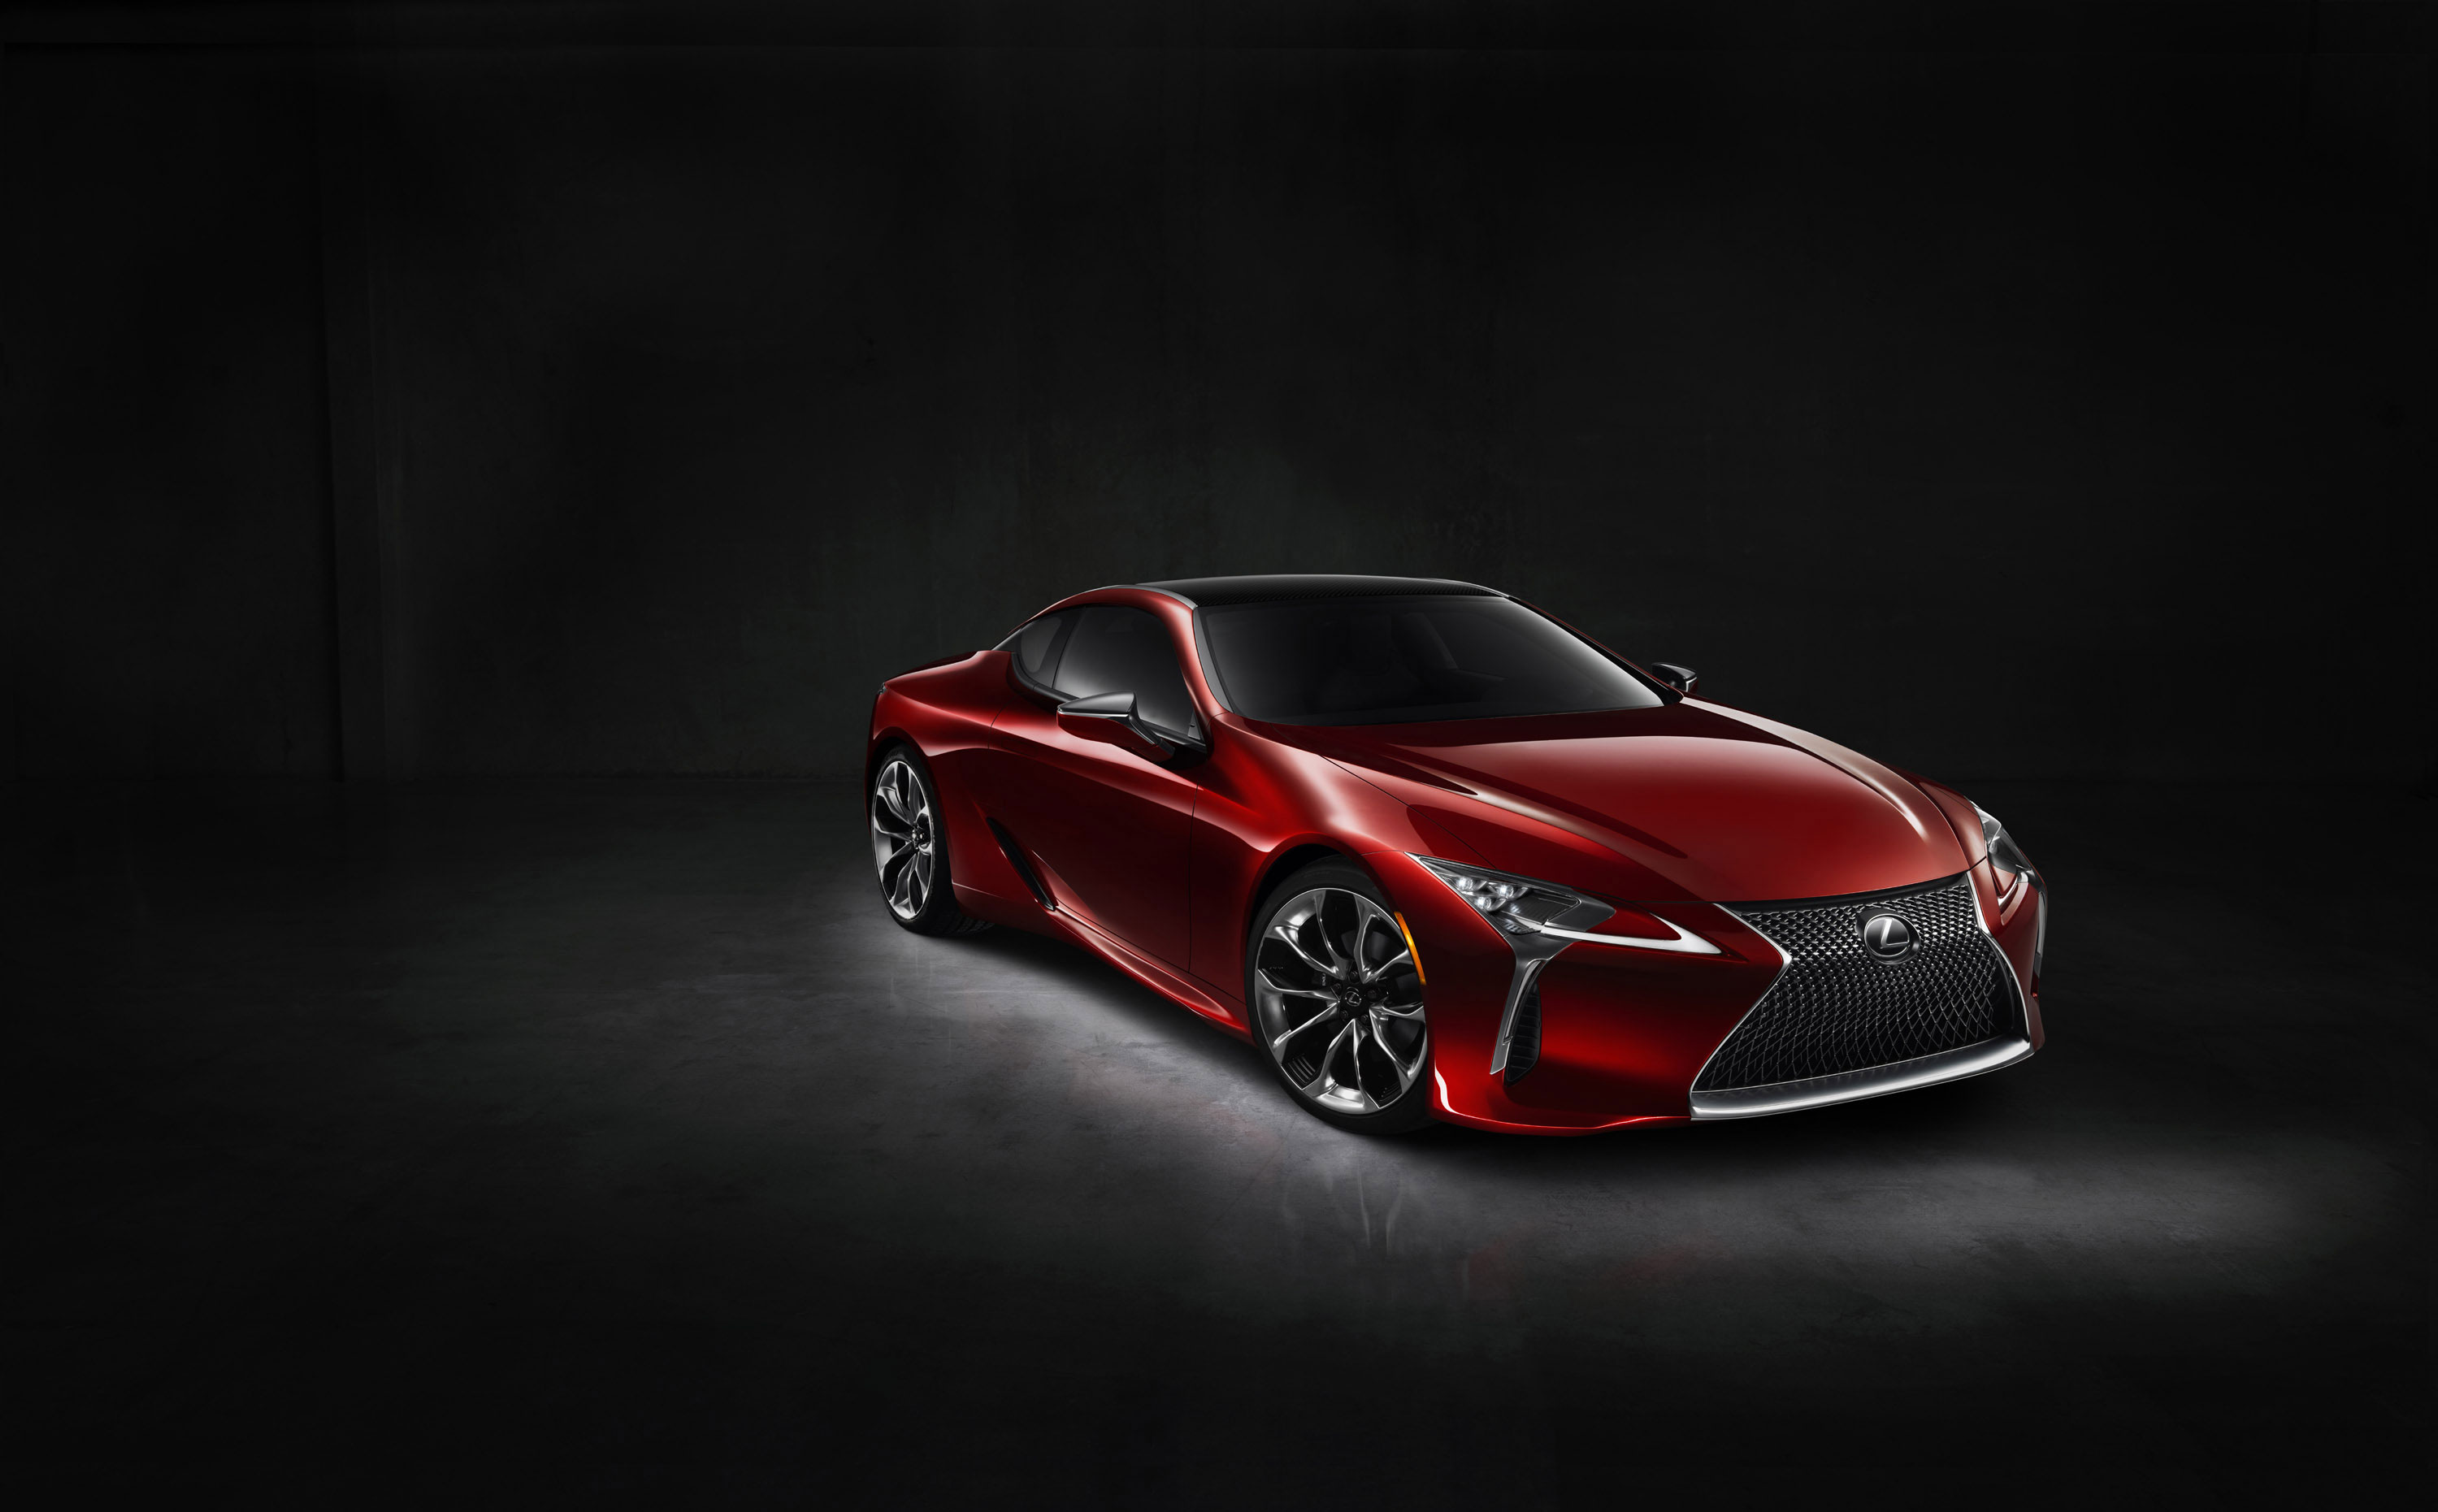 16-01-12-gallery-lexus-lc-500-official-2